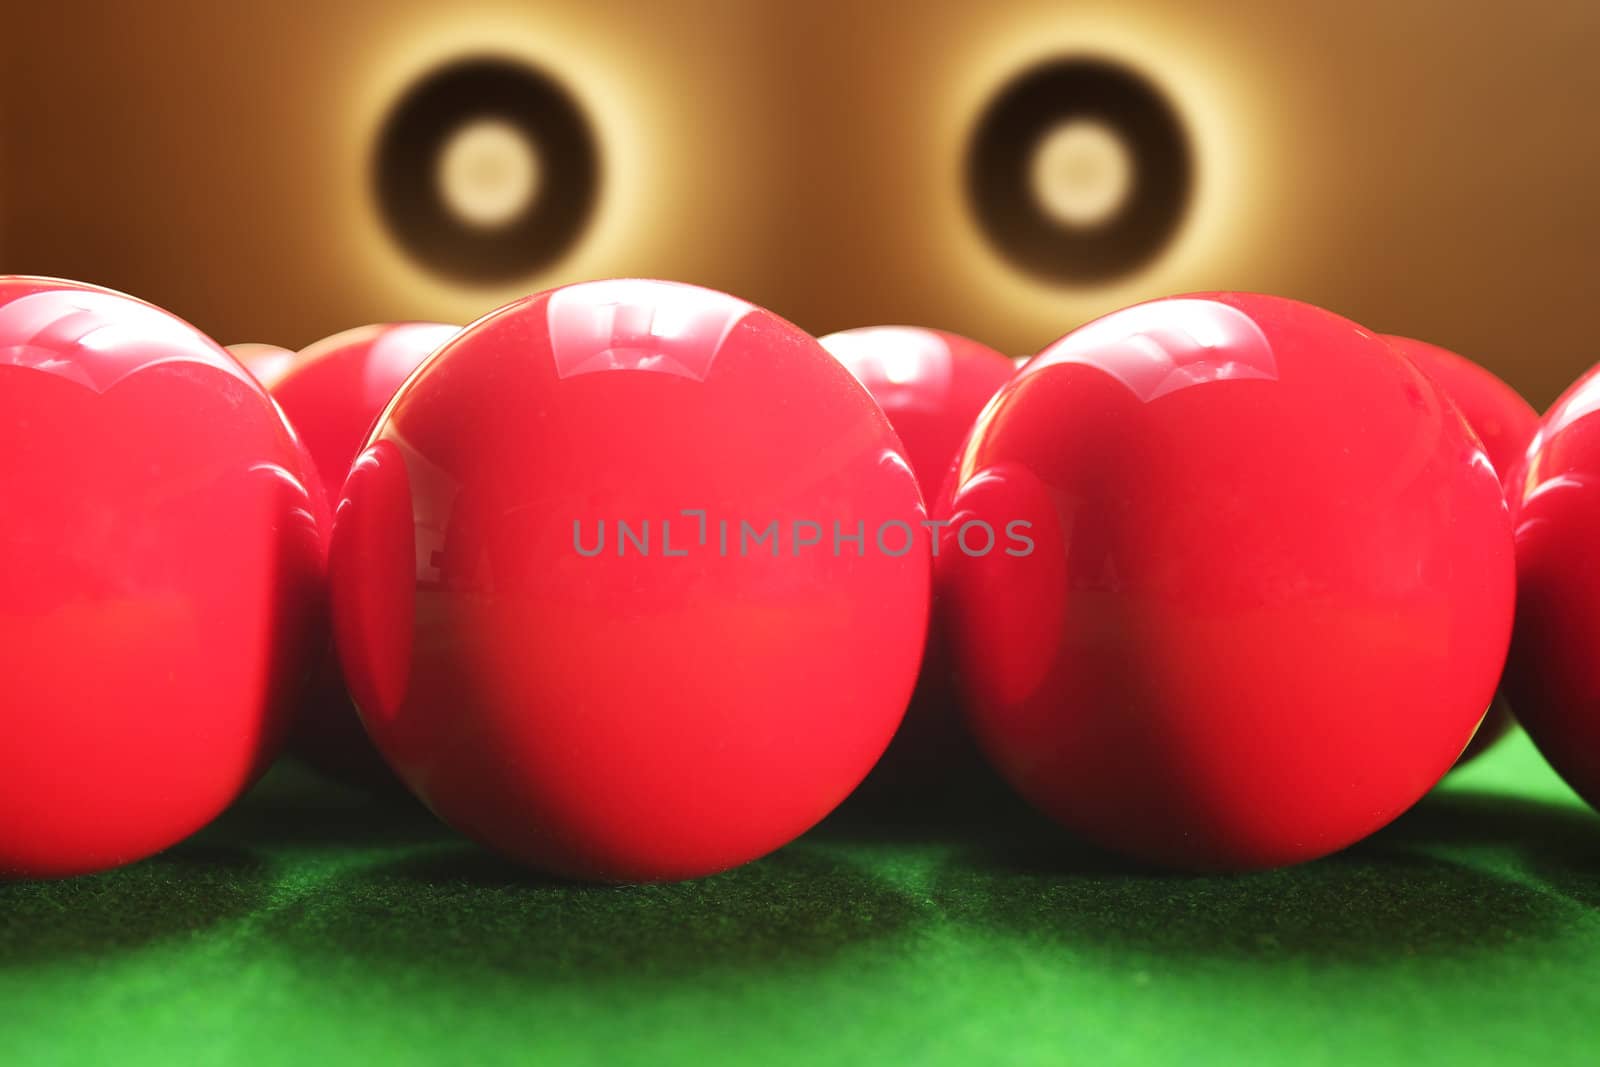 Snooker balls with beautiful circular lights in the background